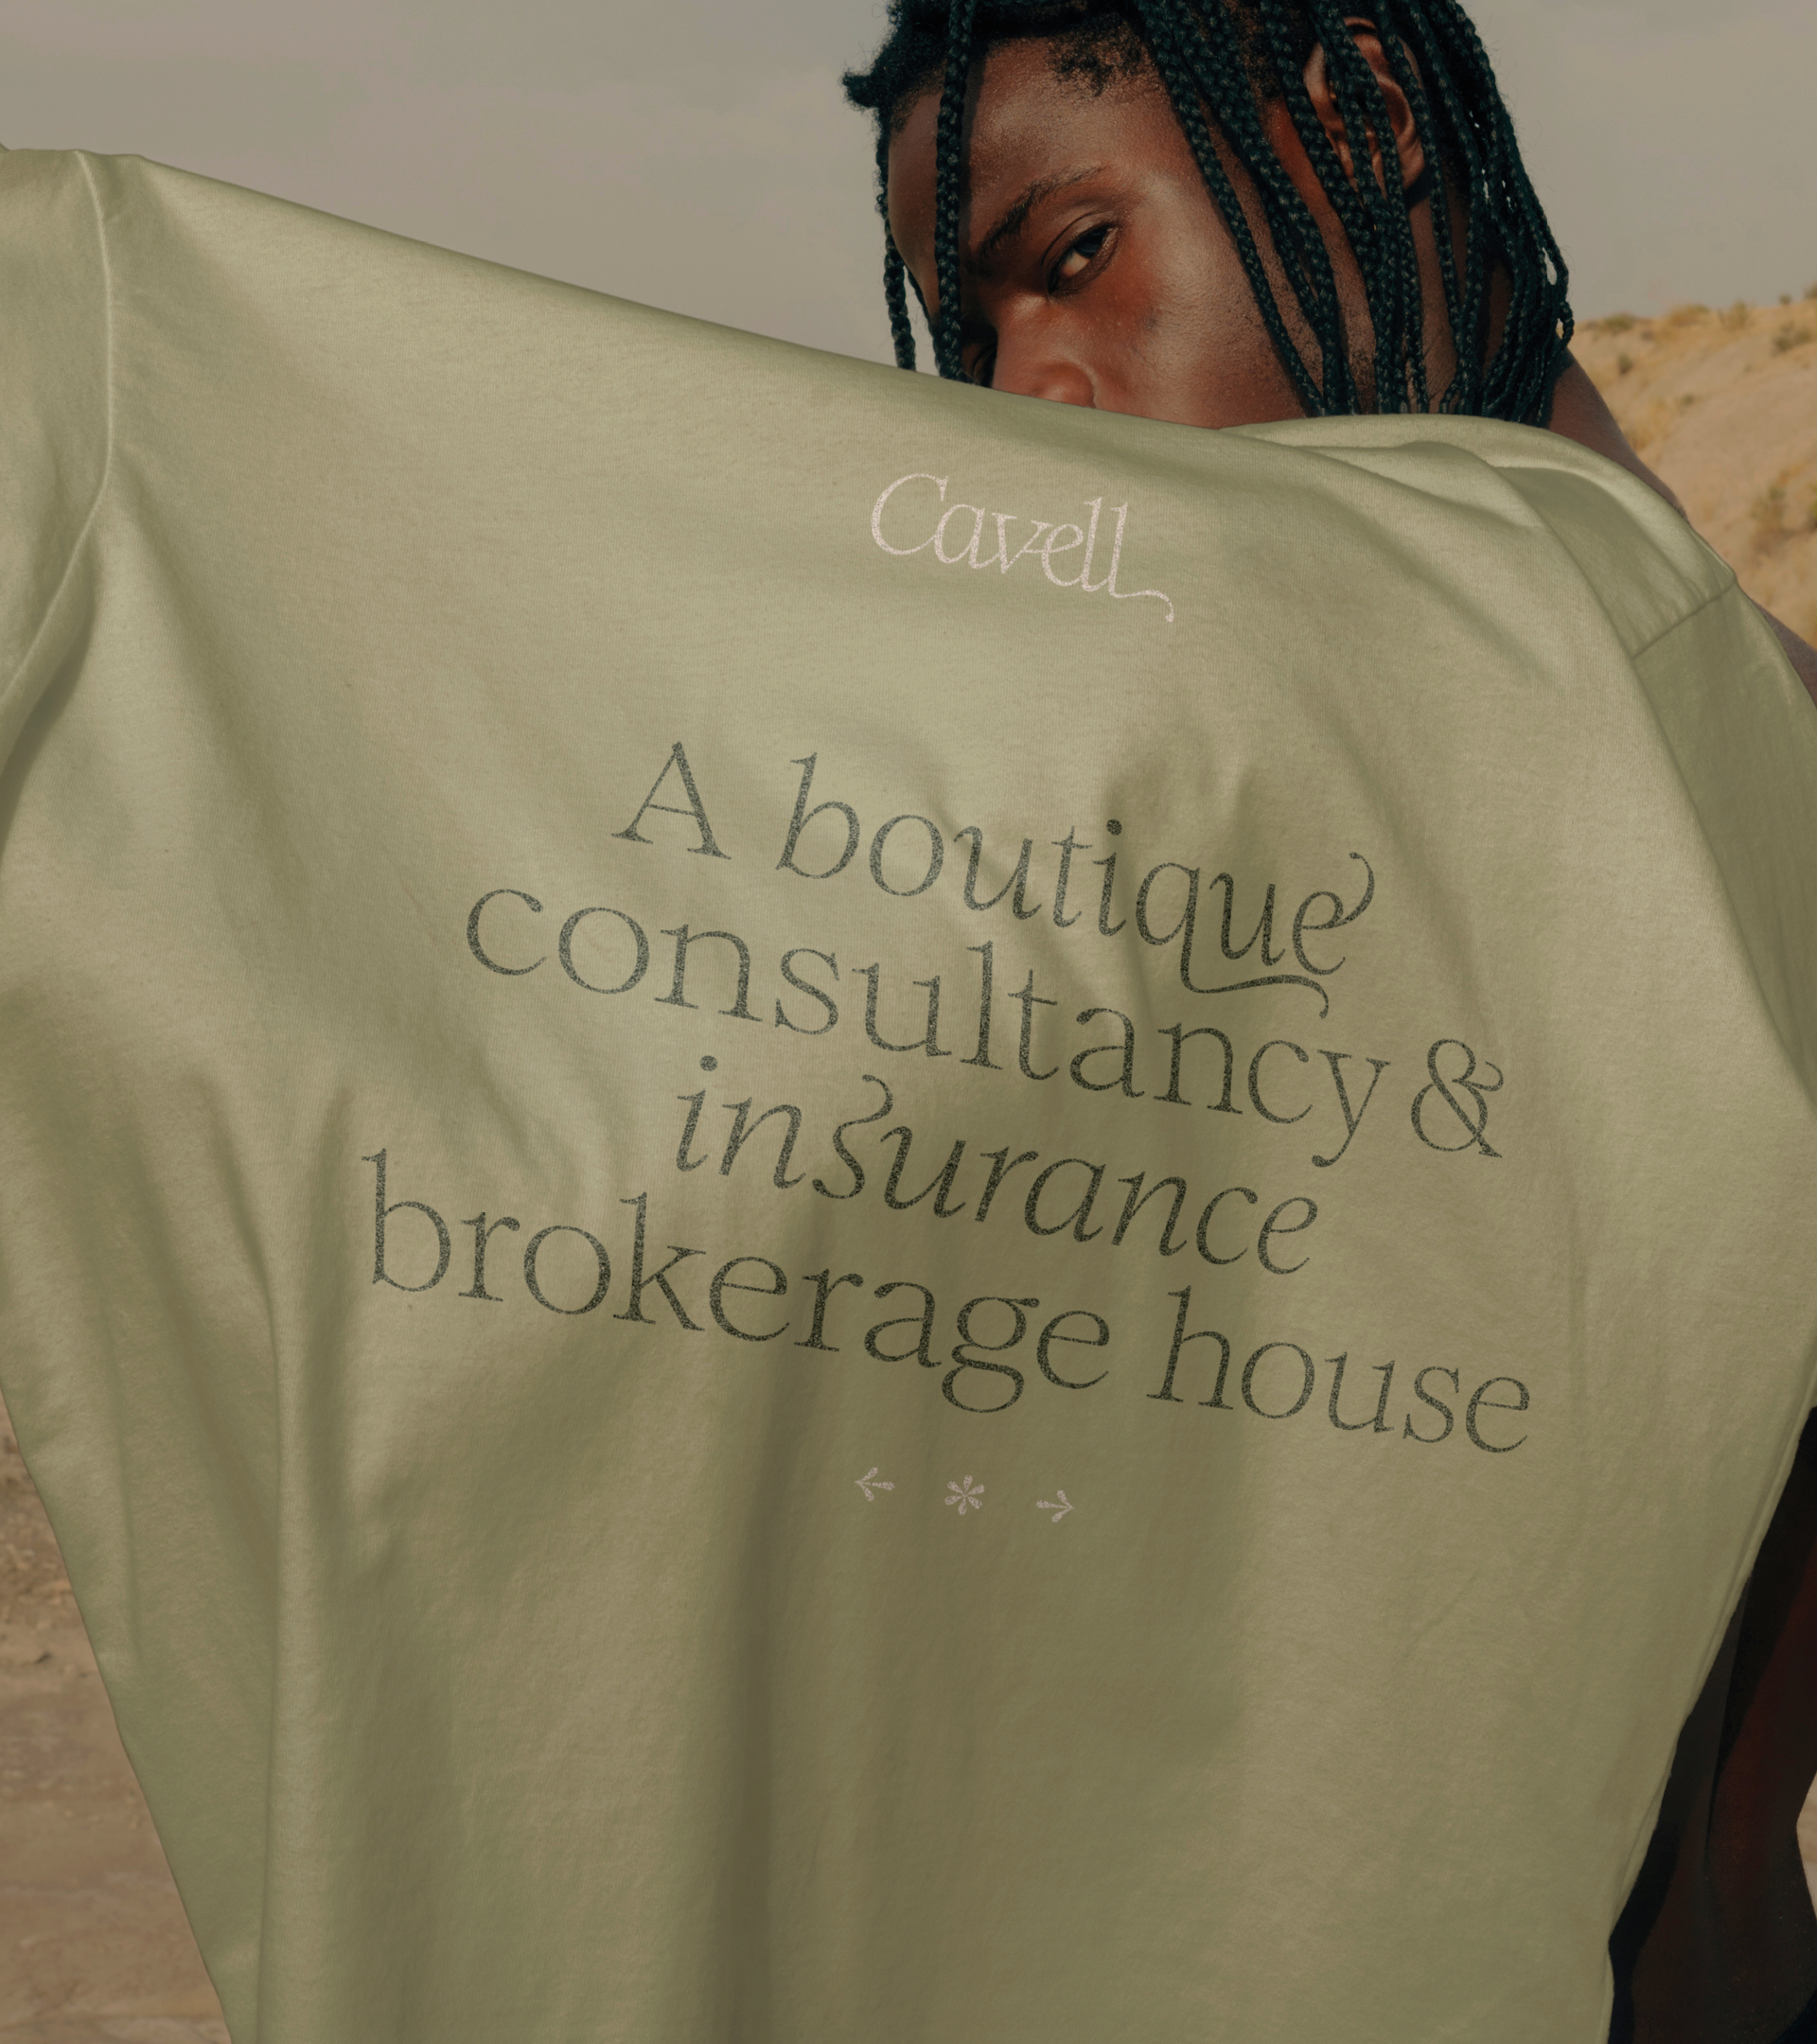 Cavell: Boutique Insurance